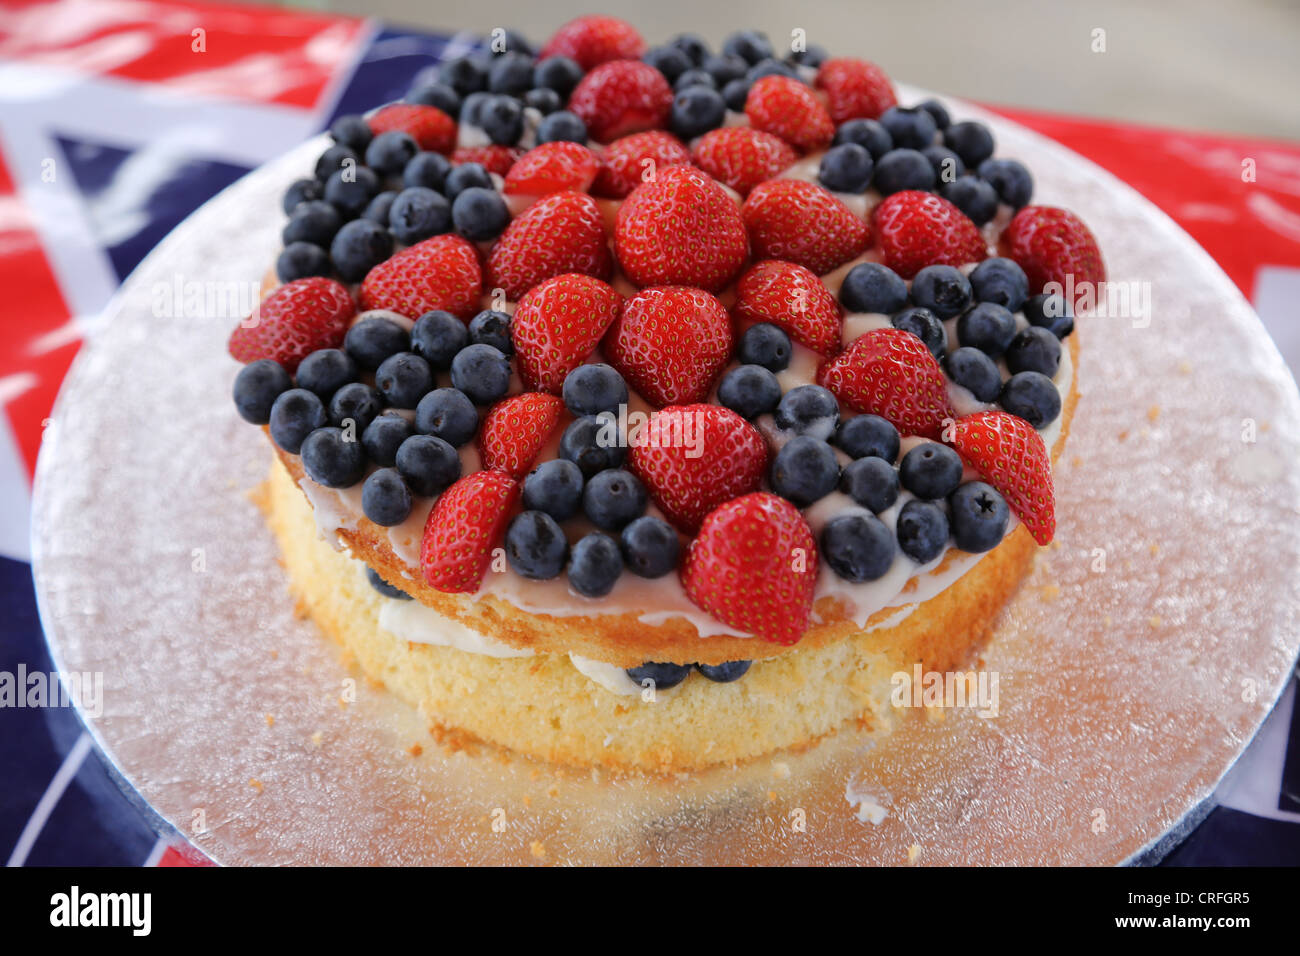 Sponge Cake With Strawberries And Blueberries Decorated To Look Like Union Jack Made For The Queen's Diamond Jubilee Stock Photo